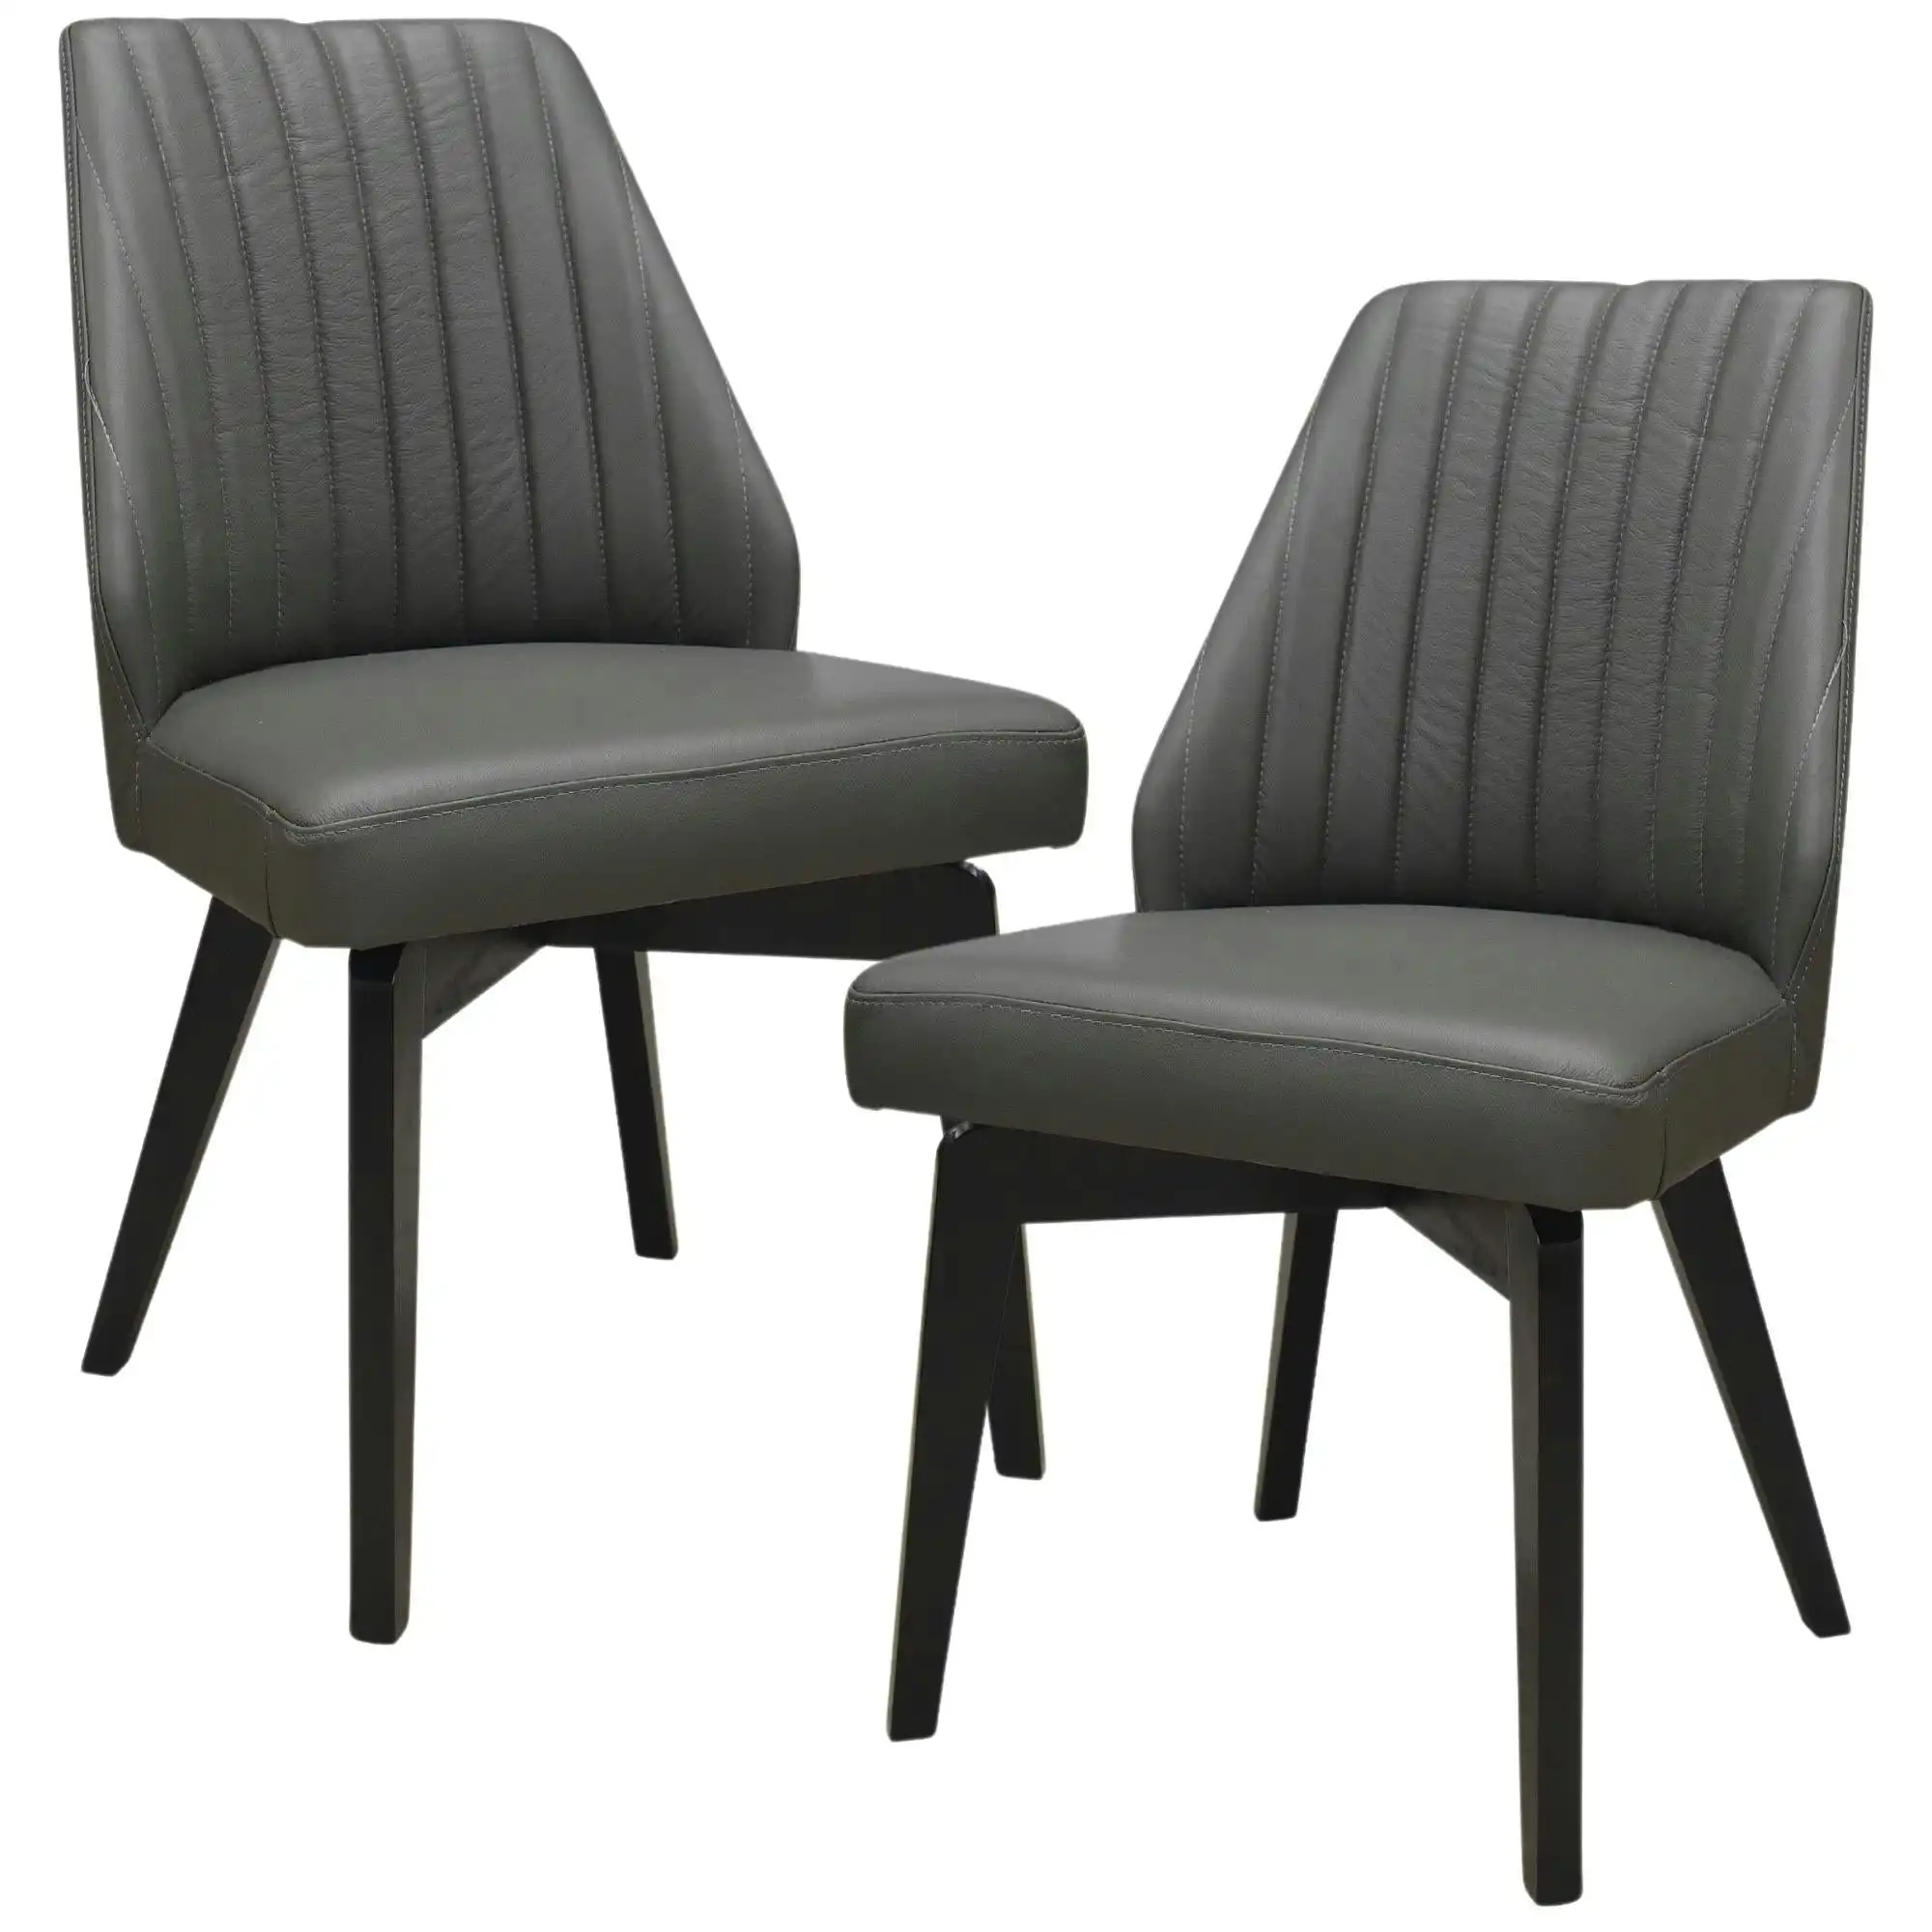 Shelby Set of 2 Leather Dining Chair Dark Grey